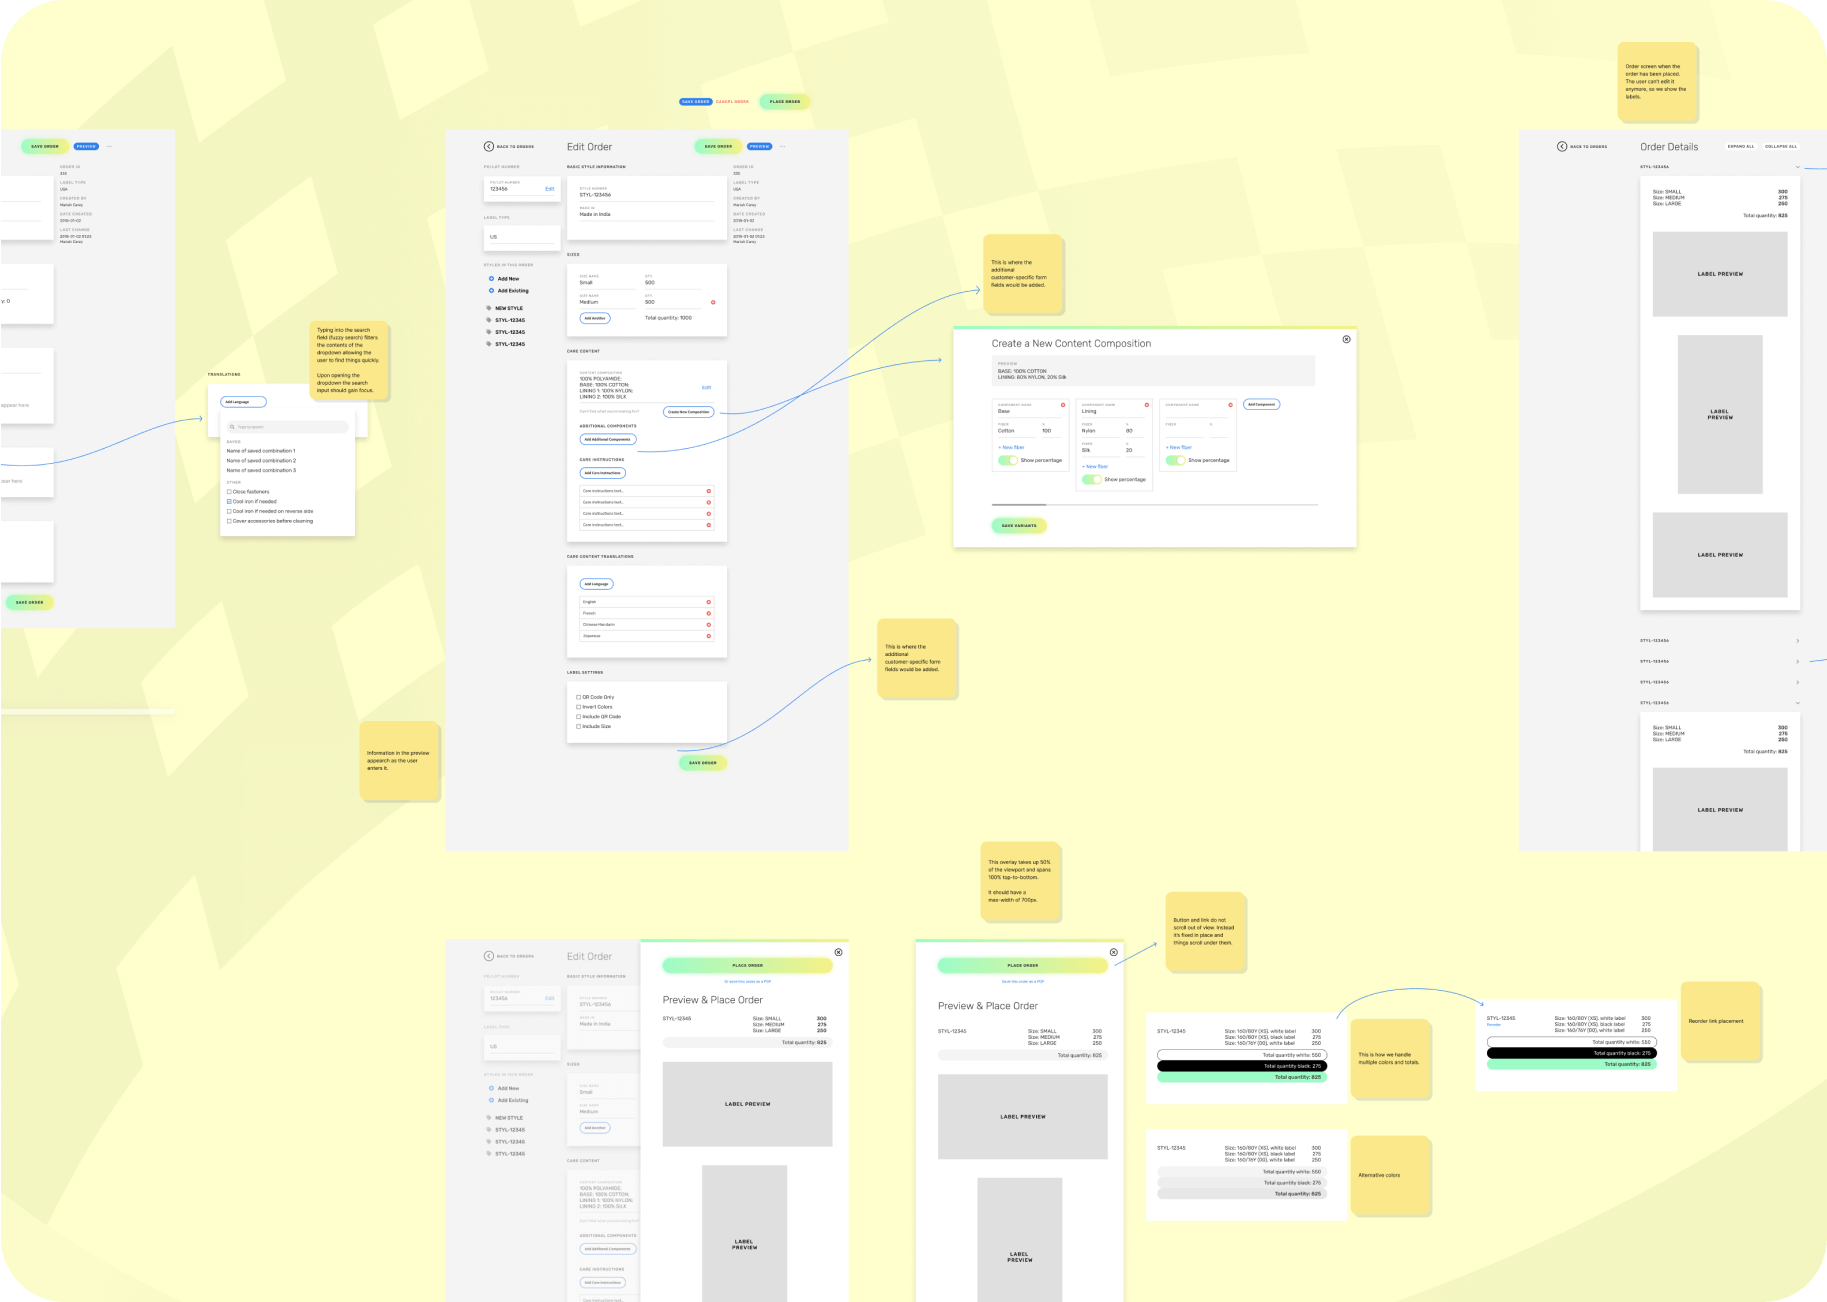 A screenshot of various UI elements and mockups from Figma showcasingthe design process.